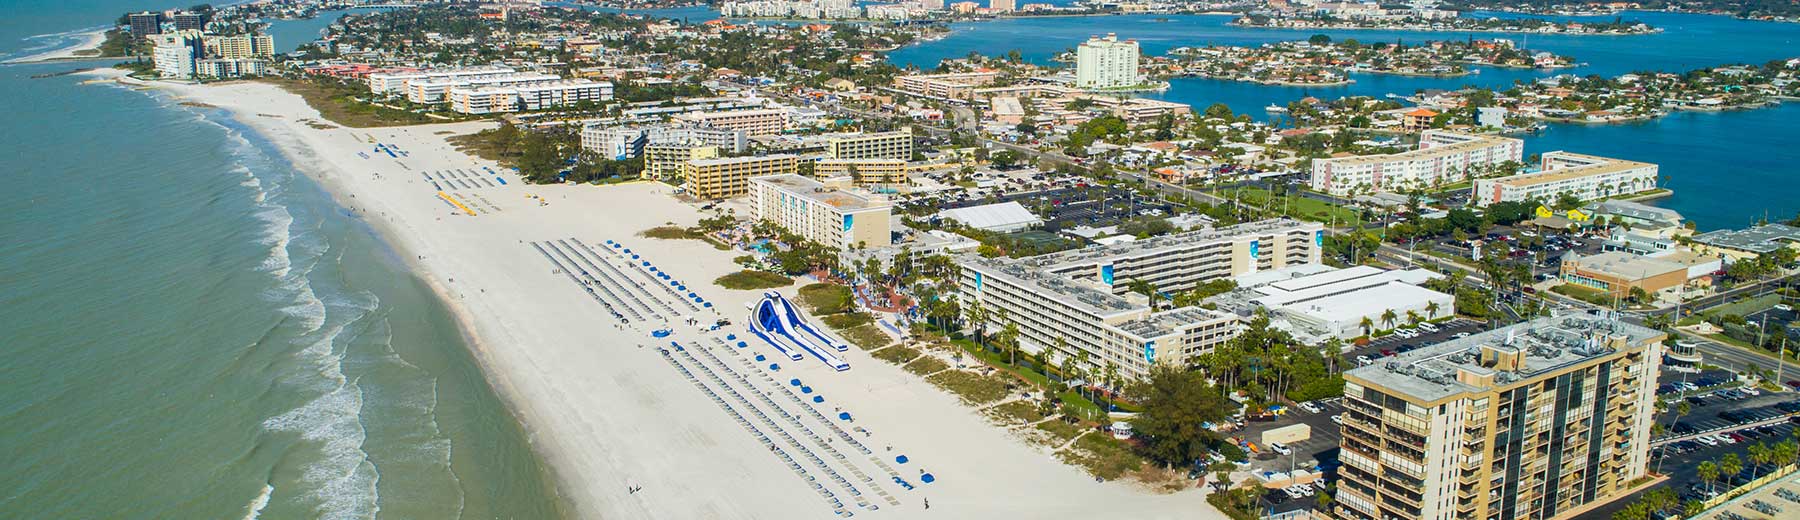 Florida beach with hotels